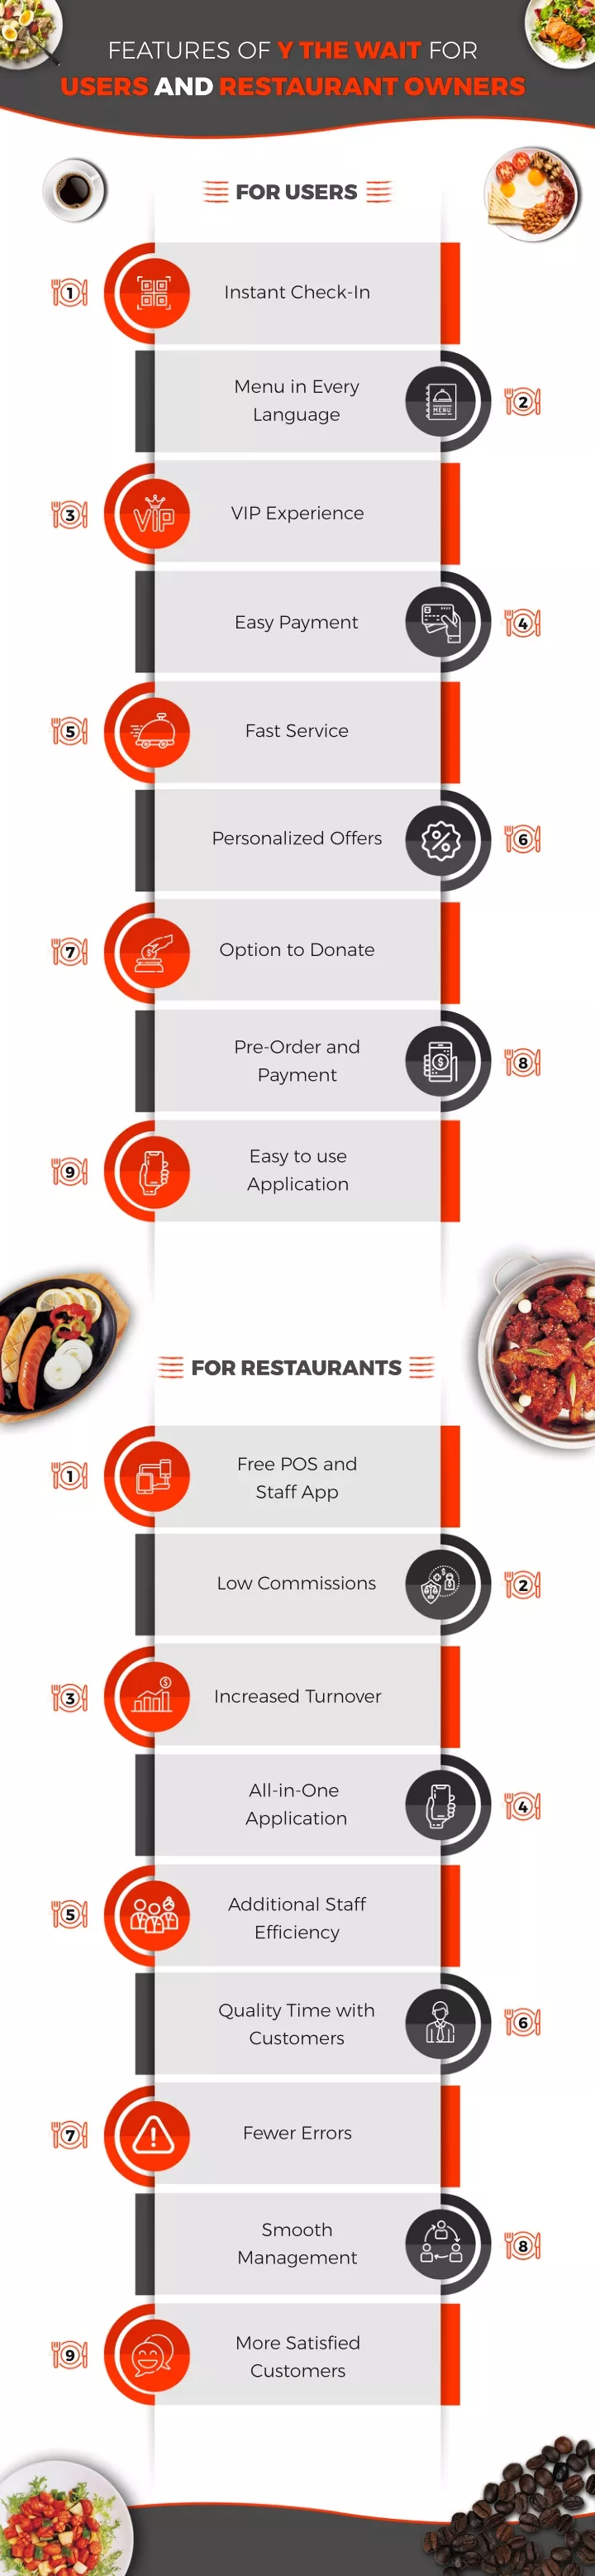 features of y the wait for users and restaurant